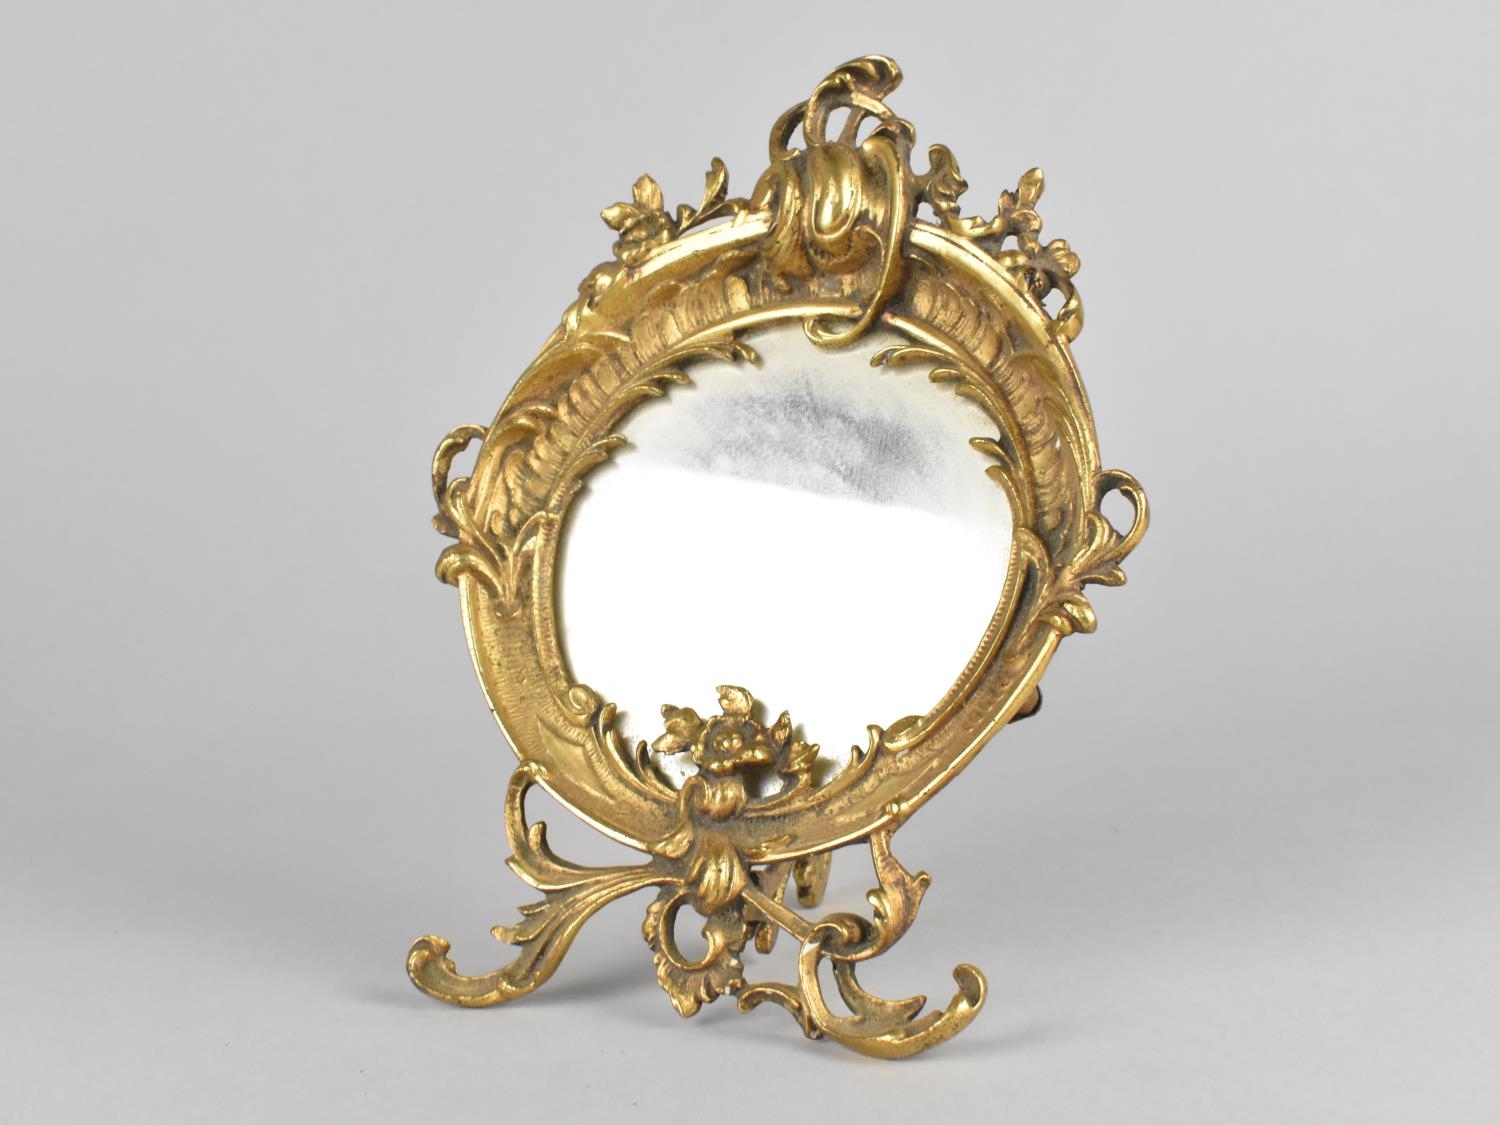 A Small Ornate Cast Brass Dressing Table Mirror of Circular Form with Floral and Scrolled - Image 4 of 4